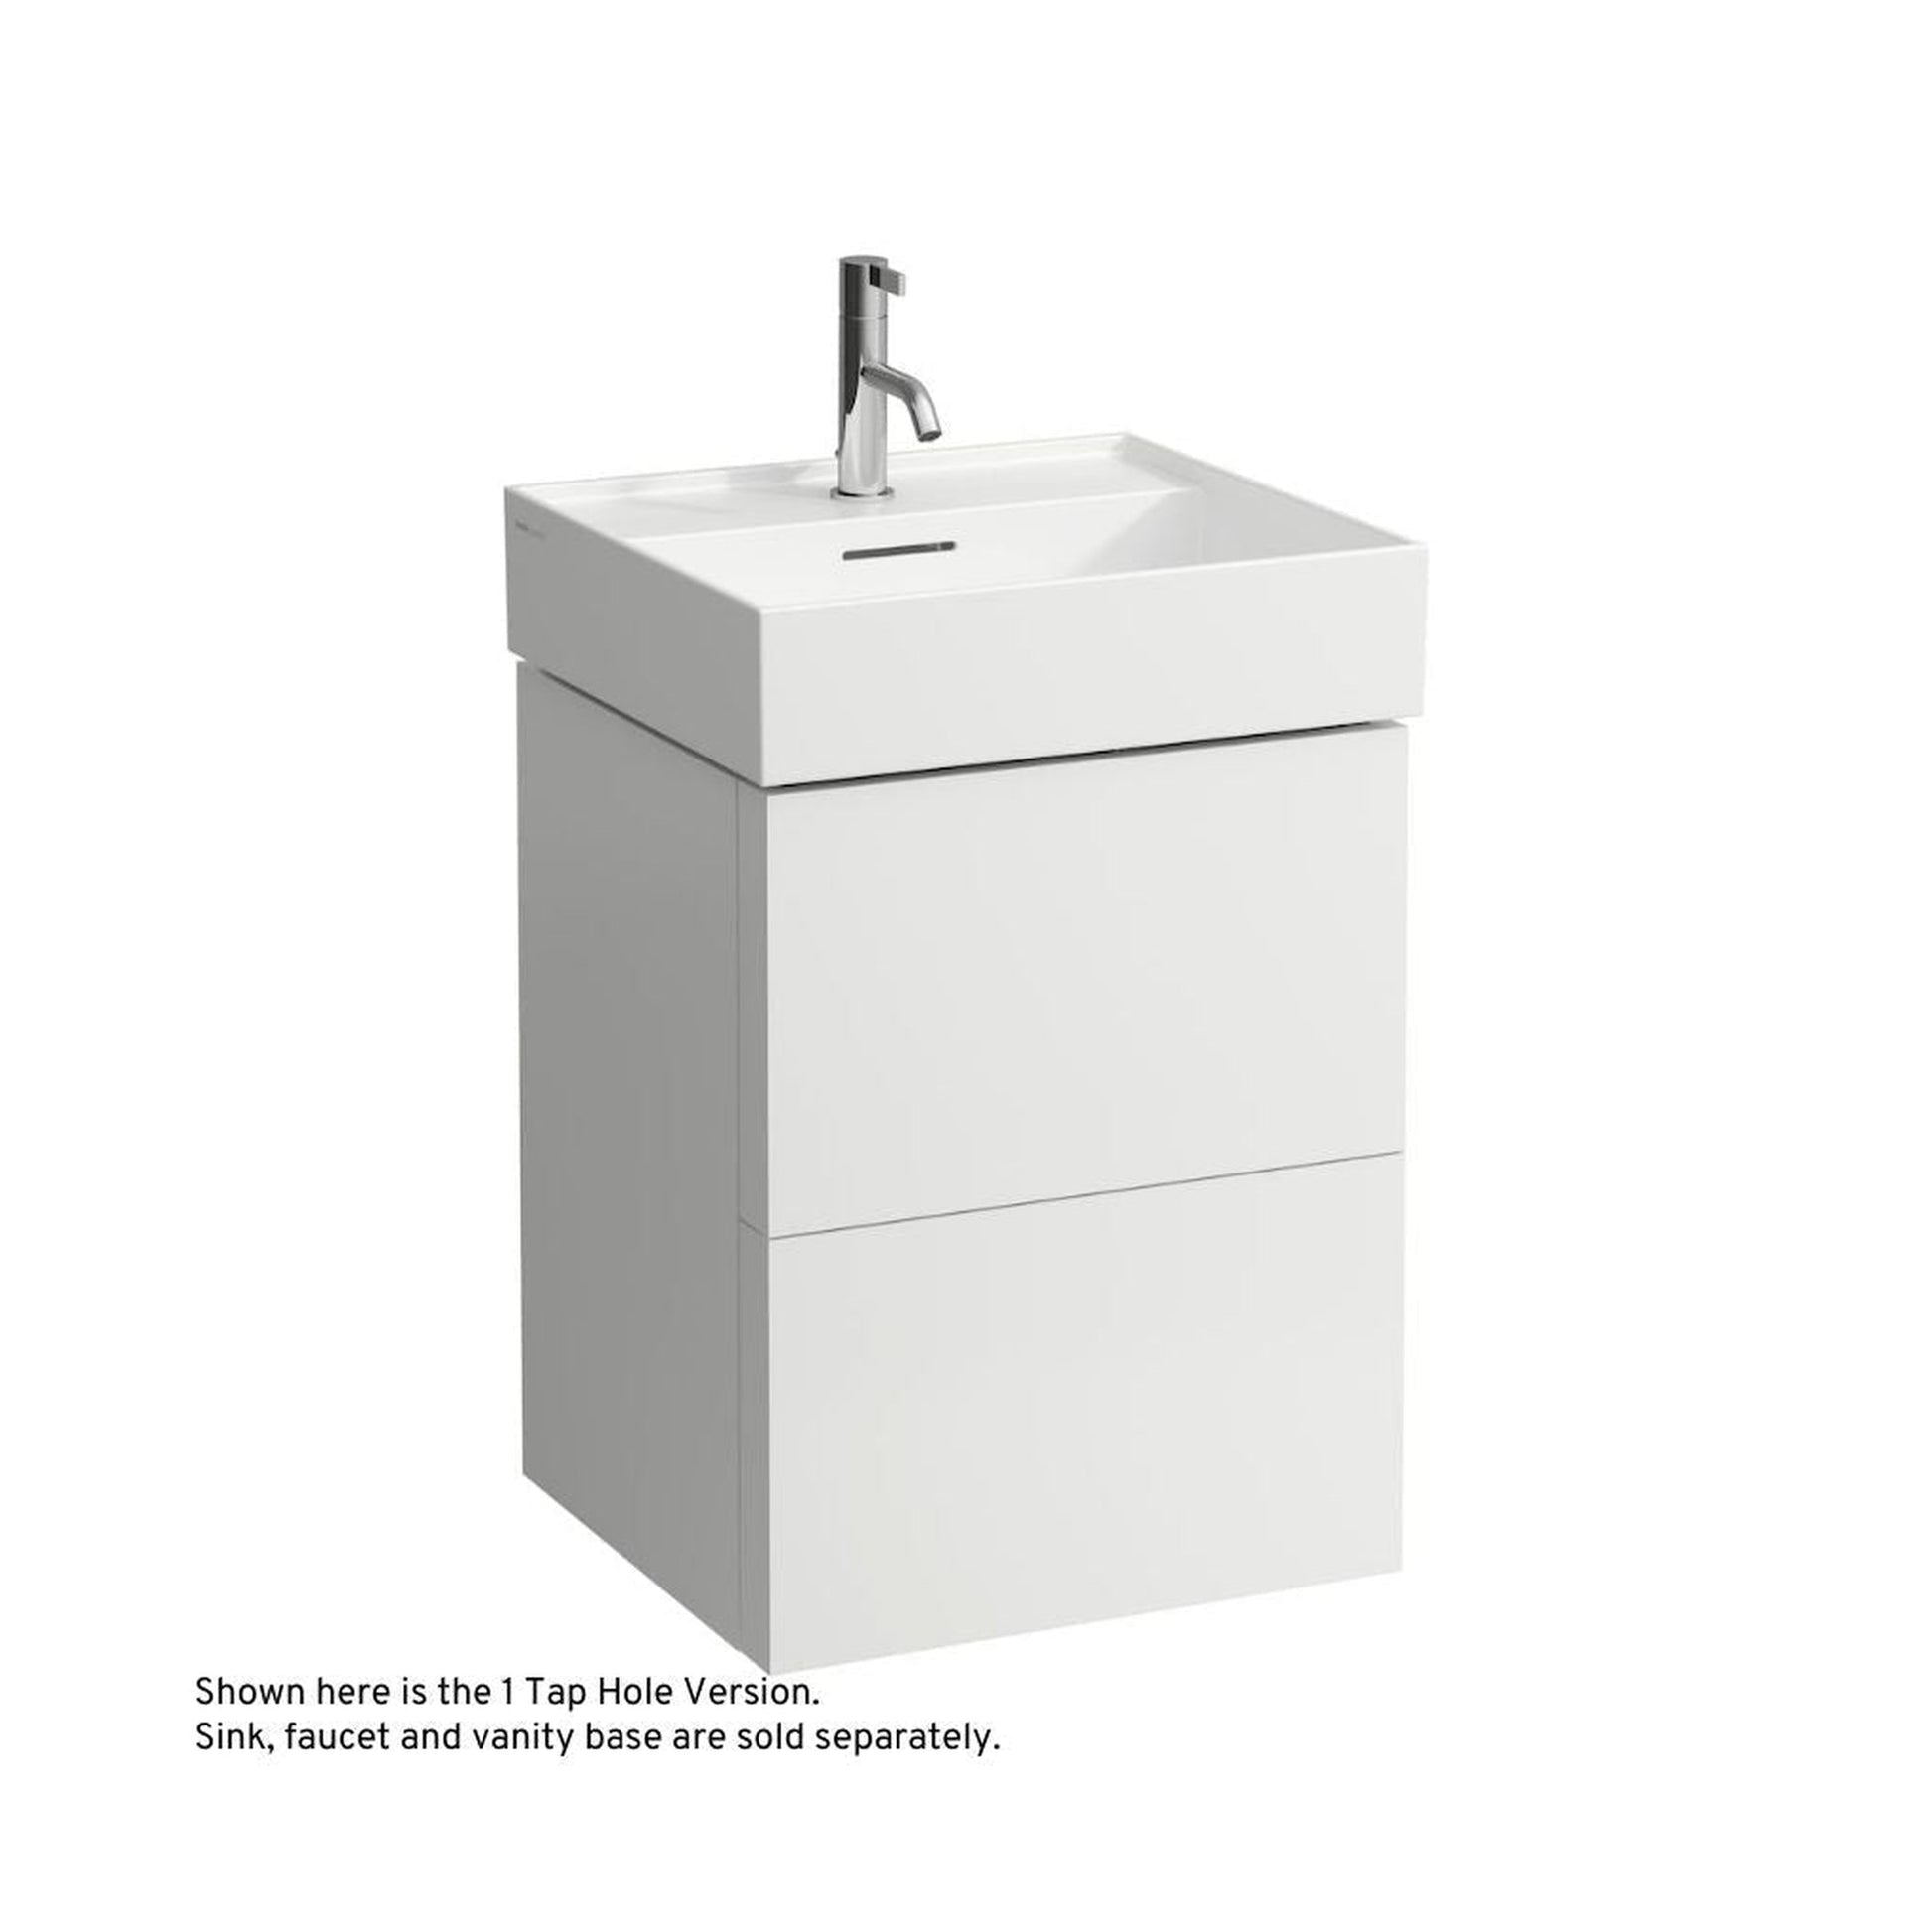 Laufen Kartell 20" x 18" White Wall-Mounted Bathroom Sink With 3 Faucet Holes